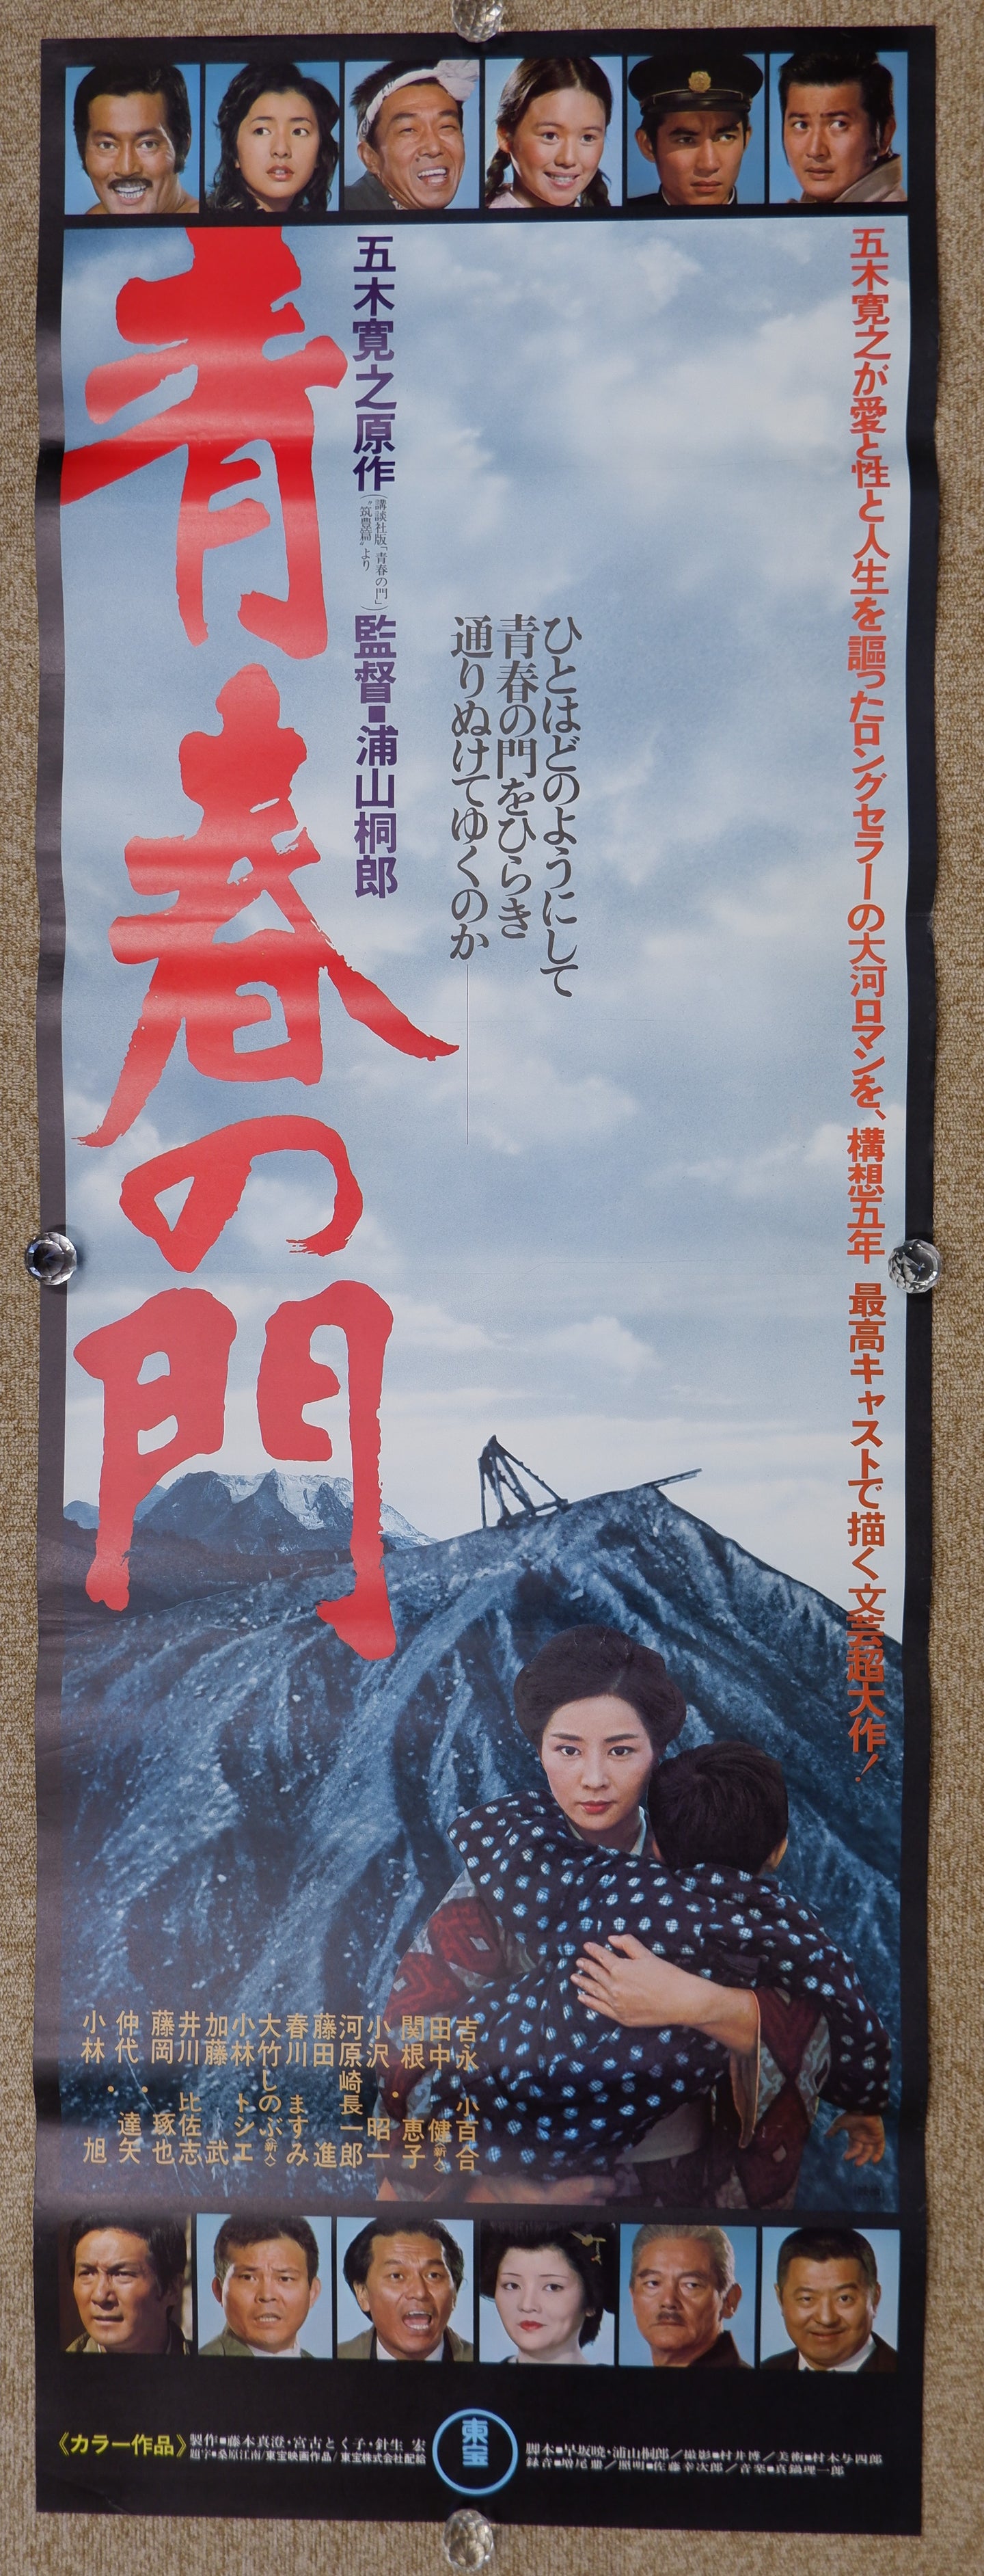 The Gate of Youth (青春の門, Seishun no mon), Original Release Movie Poster 1974, STB – 20 in x 58 in (50.8 cm x 147.3 cm)